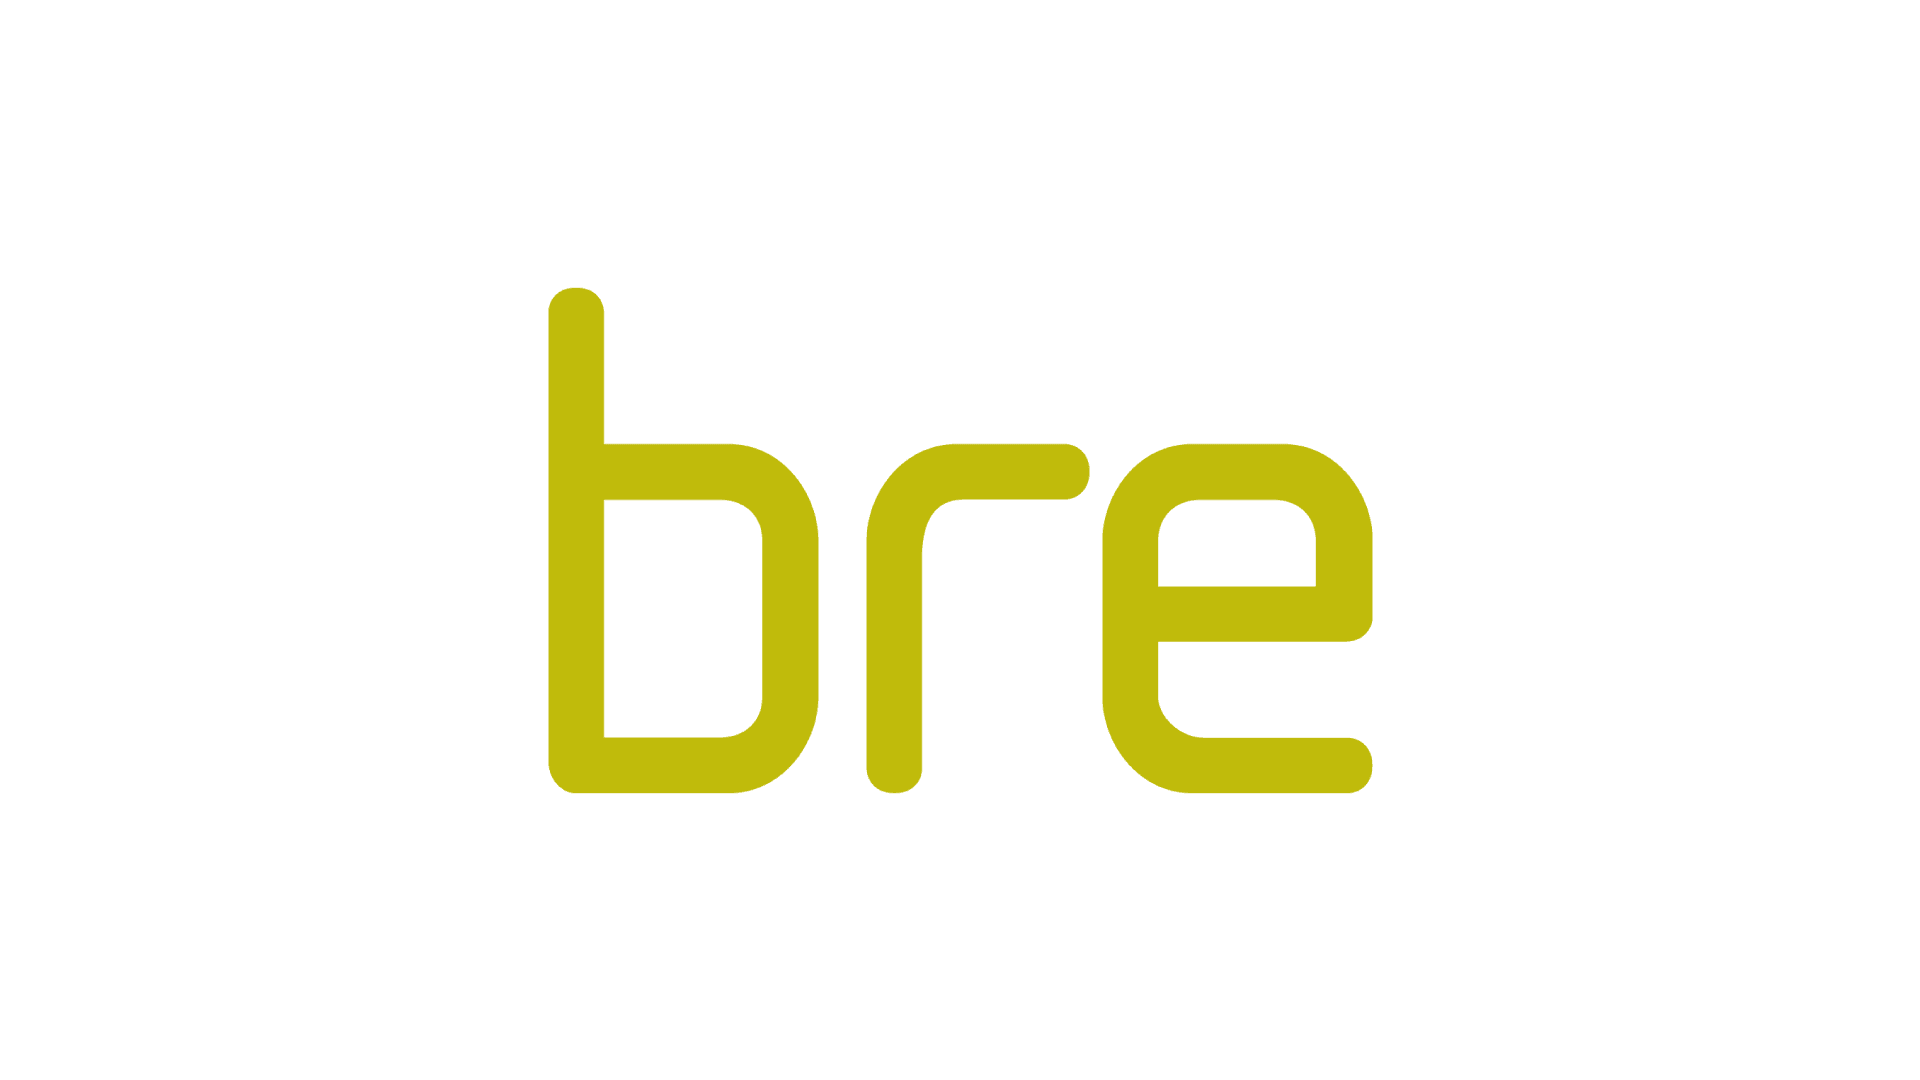 BRE, The British Research Establishment, works with CADS